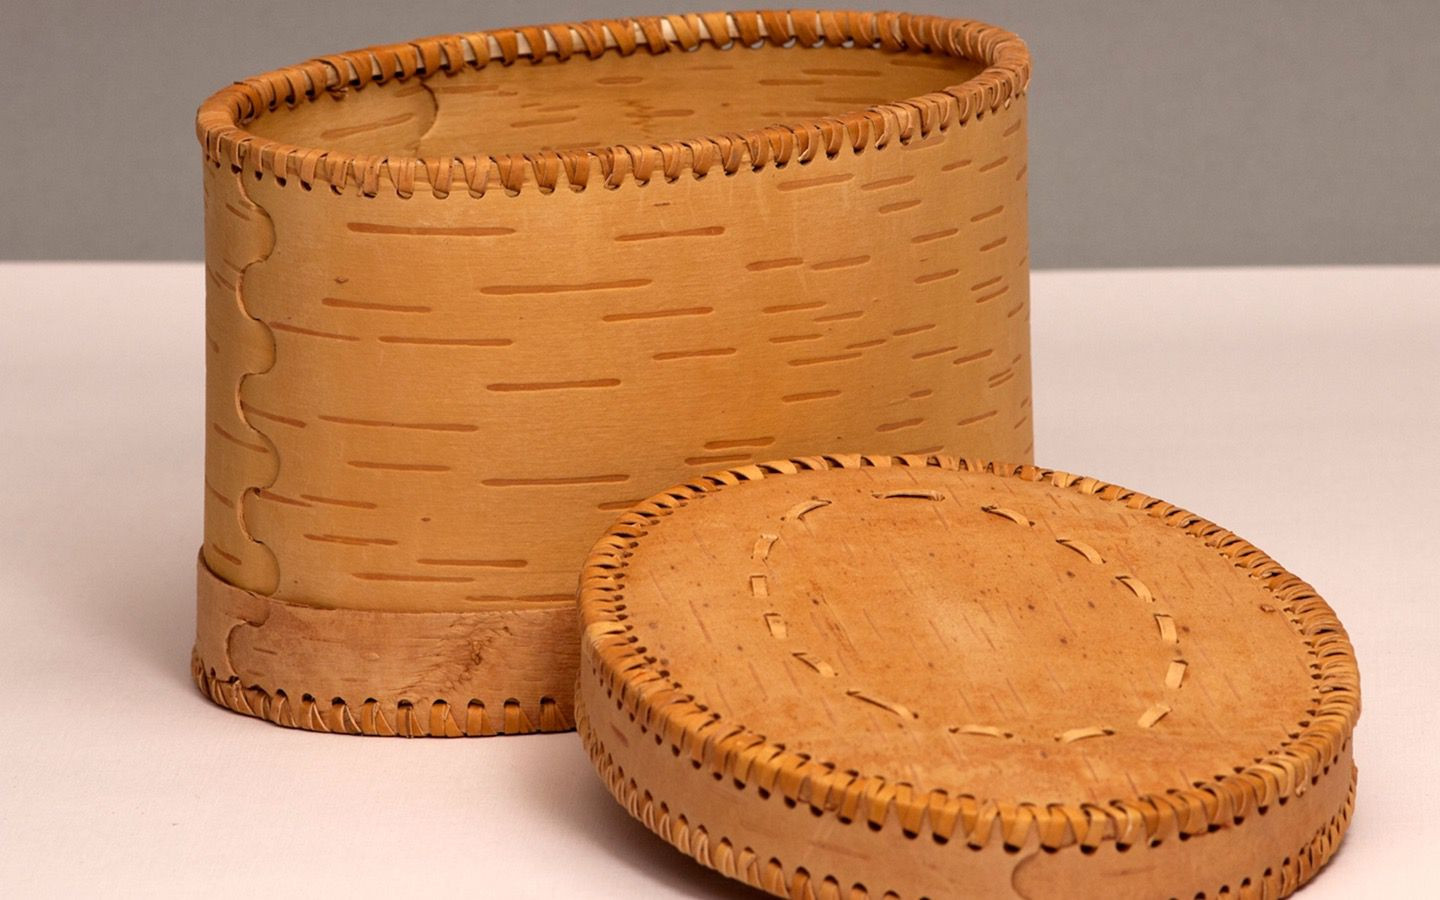 Birch bark food containers